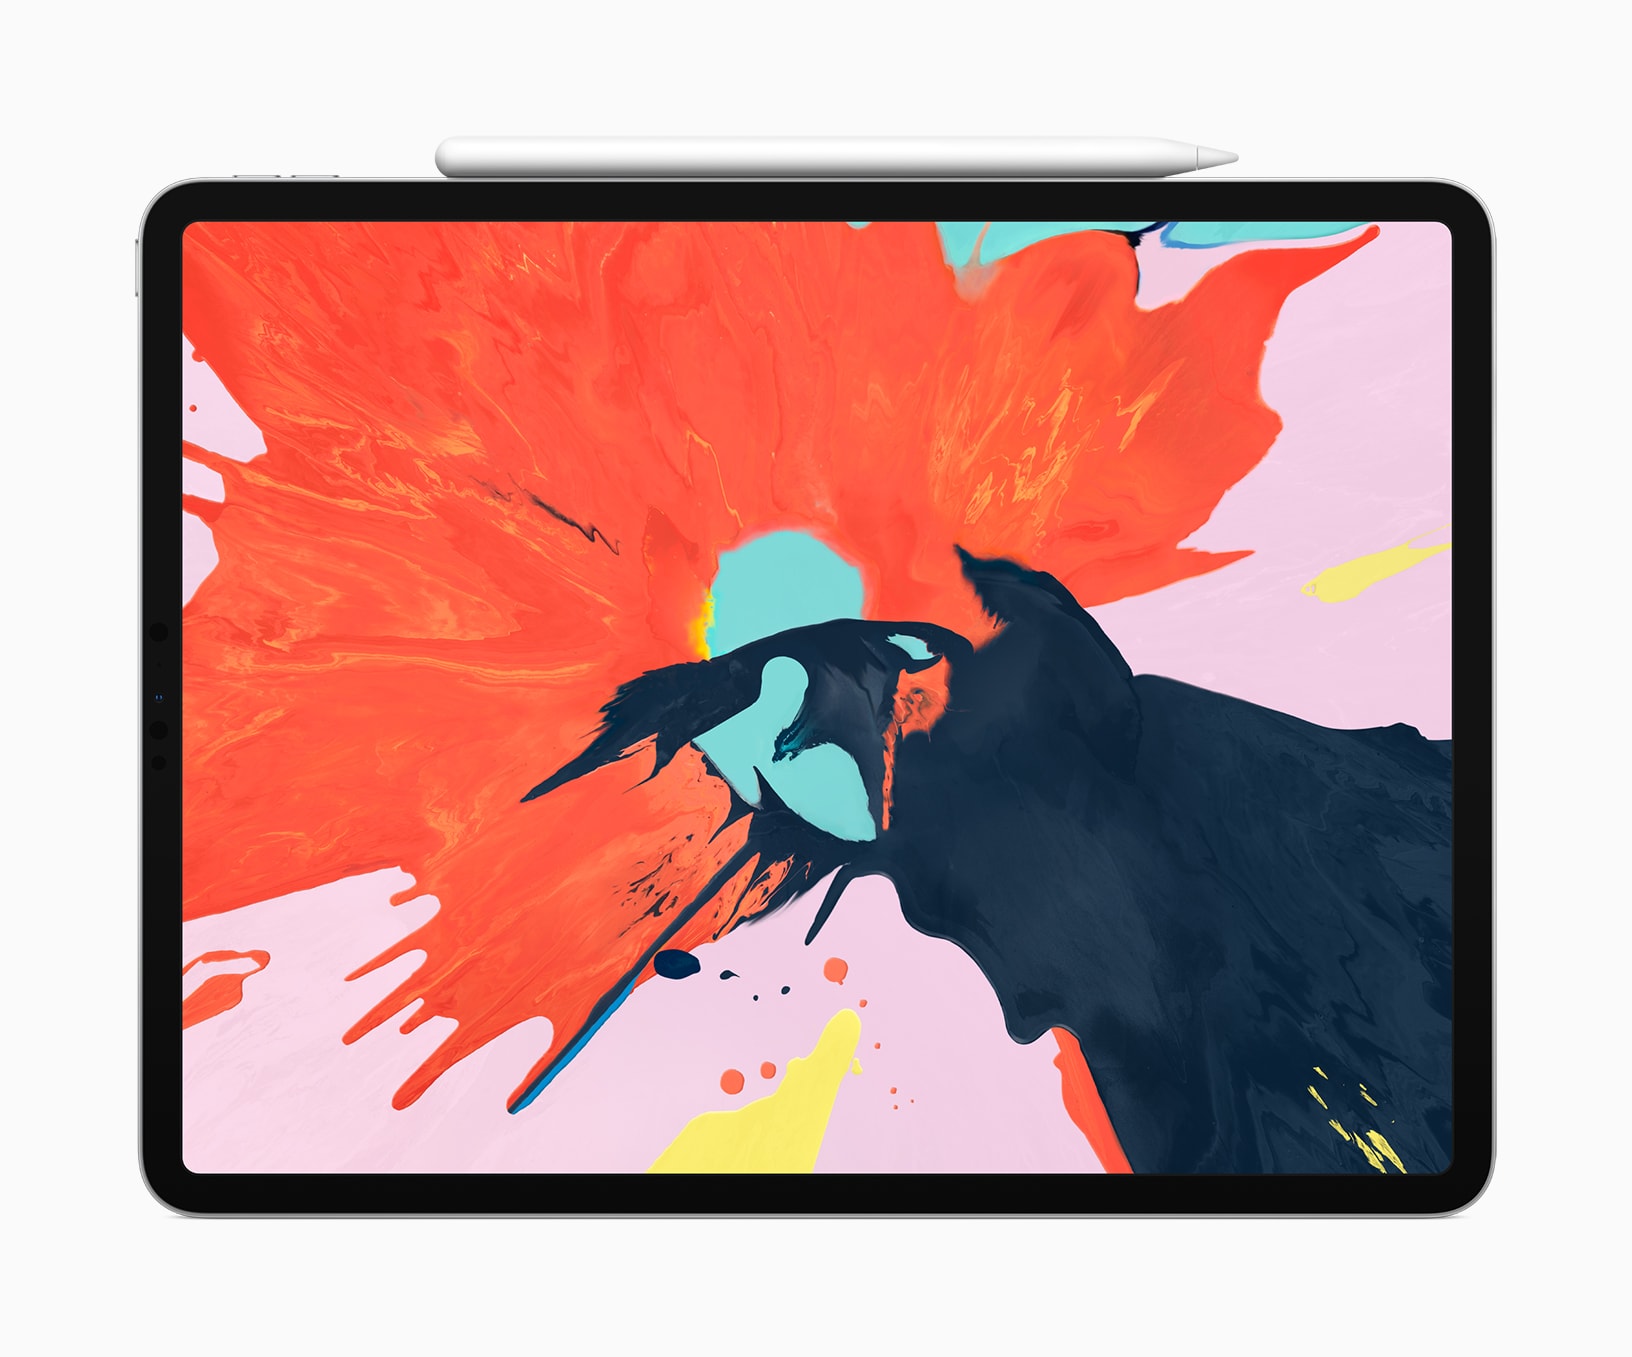 iPad Pro lying with Apple Pencil magnetically attached to it